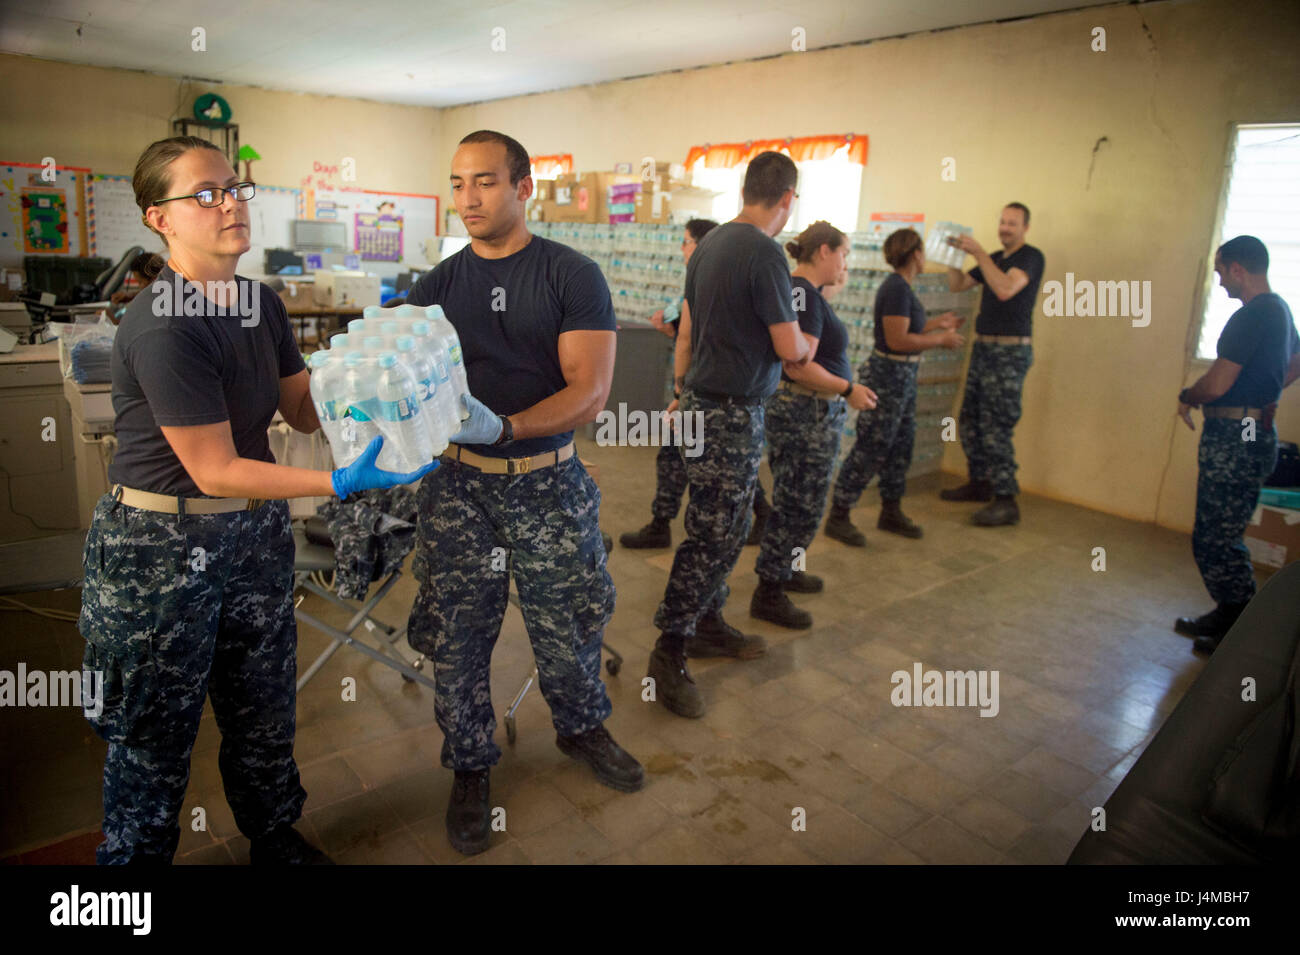 170220-N-YL073-221 TRUJILLO, Honduras (Feb. 20, 2017) – Sailors pass drinking water at the Continuing Promise 2017 (CP-17) medical site in support of CP-17's visit to Trujillo, Honduras. CP-17 is a U.S. Southern Command-sponsored and U.S. Naval Forces Southern Command/U.S. 4th Fleet-conducted deployment to conduct civil-military operations including humanitarian assistance, training engagements, and medical, dental, and veterinary support in an effort to show U.S. support and commitment to Central and South America. (U.S. Navy photo by Mass Communication Specialist 2nd Class Shamira Purifoy) Stock Photo